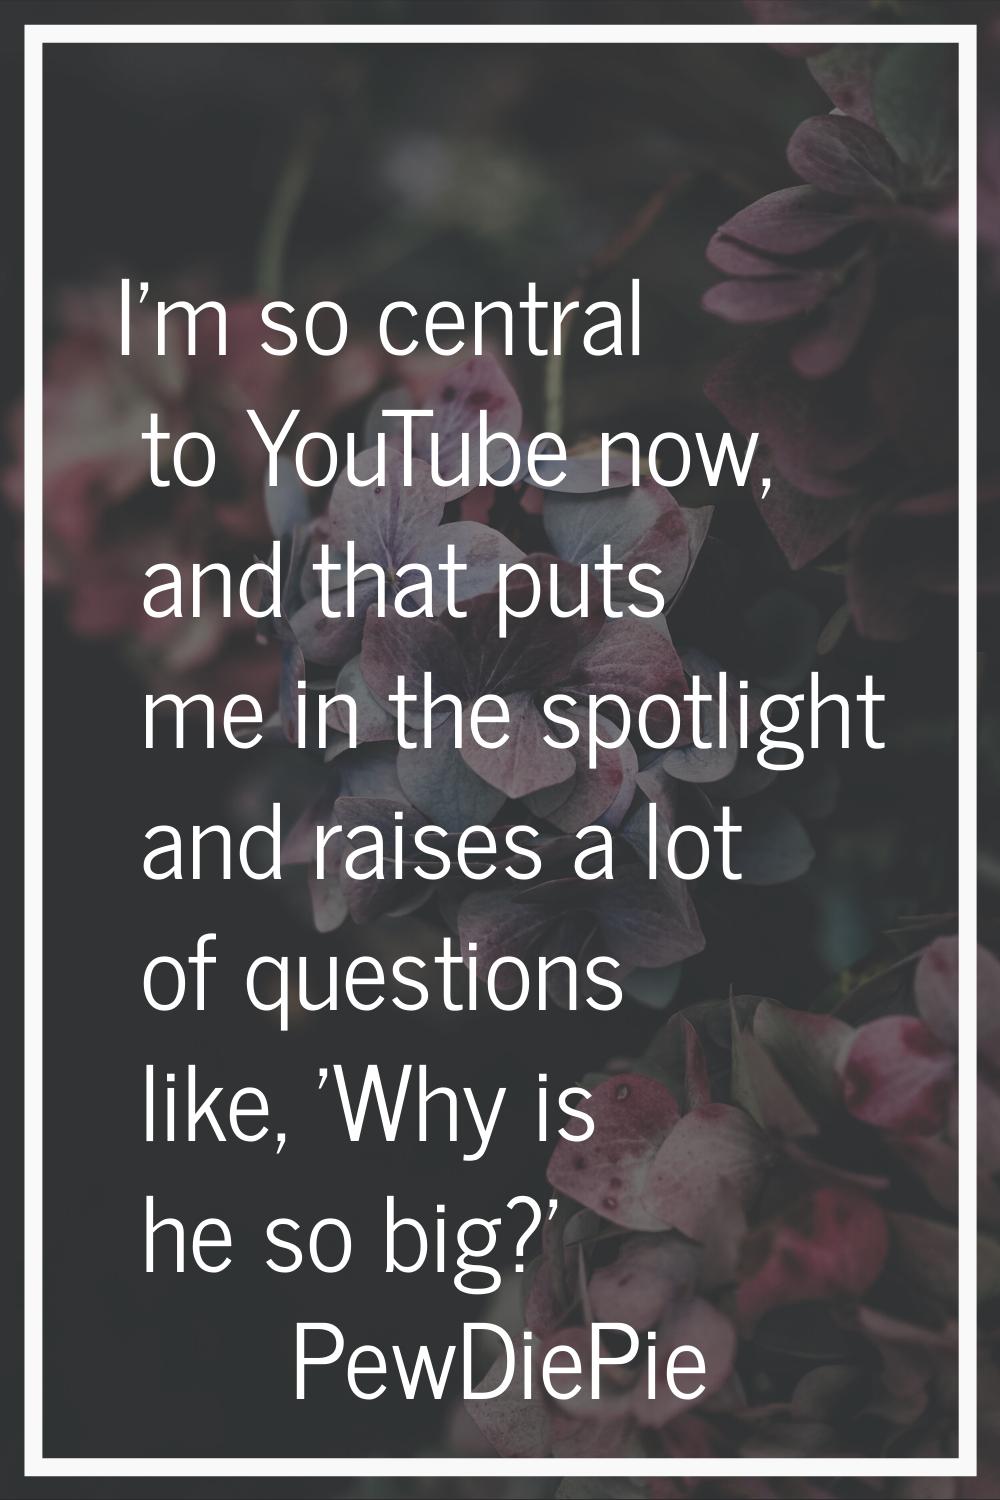 I'm so central to YouTube now, and that puts me in the spotlight and raises a lot of questions like